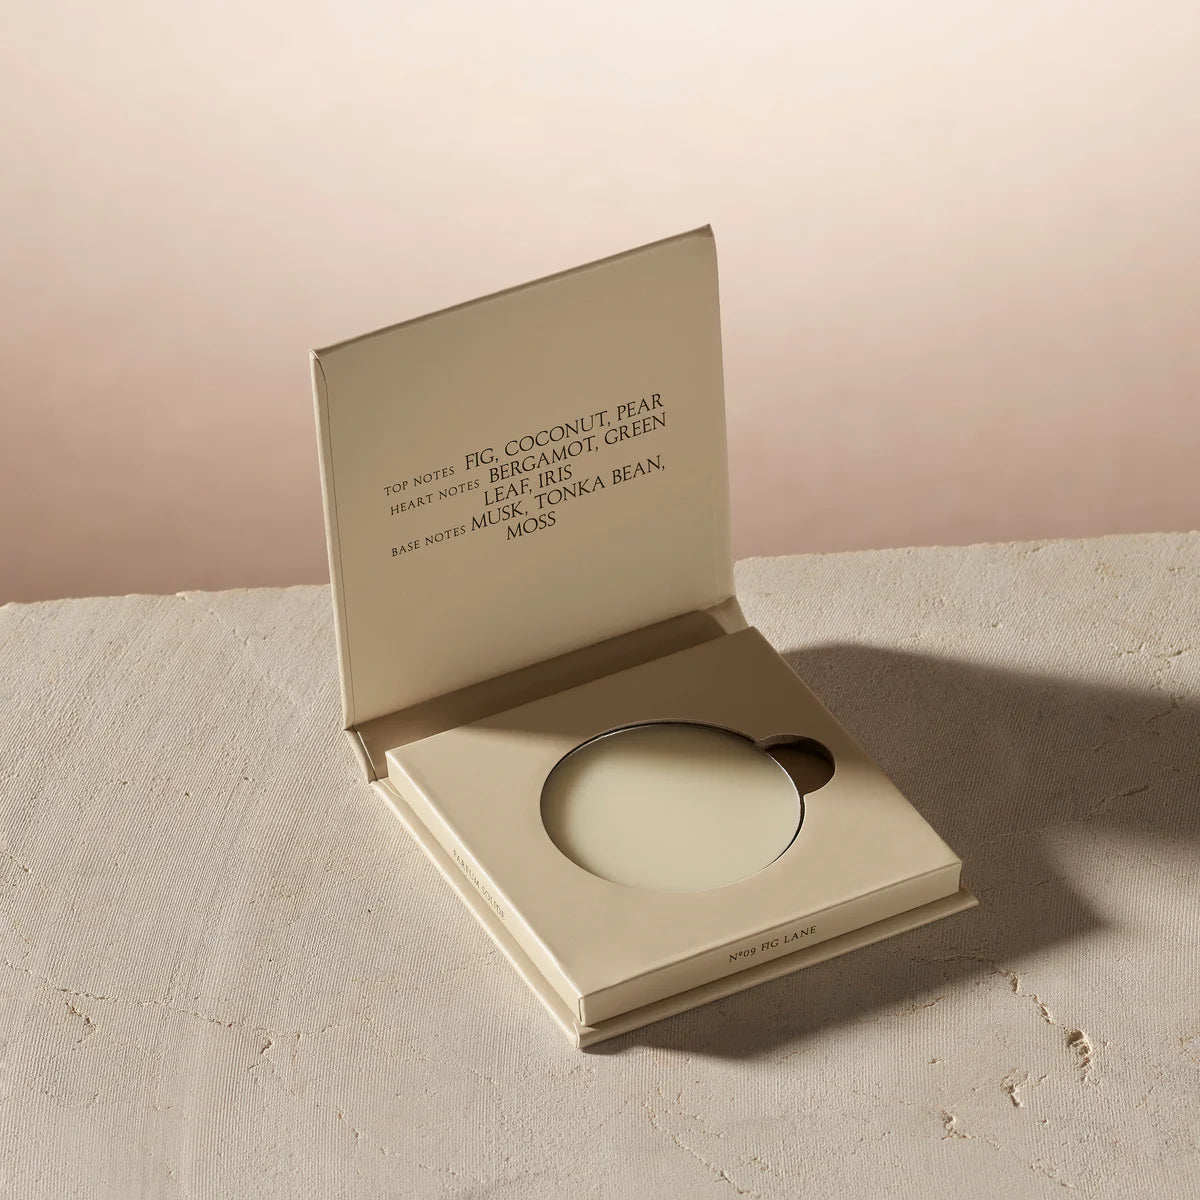 Odesse Solid Perfume - Fig Lane